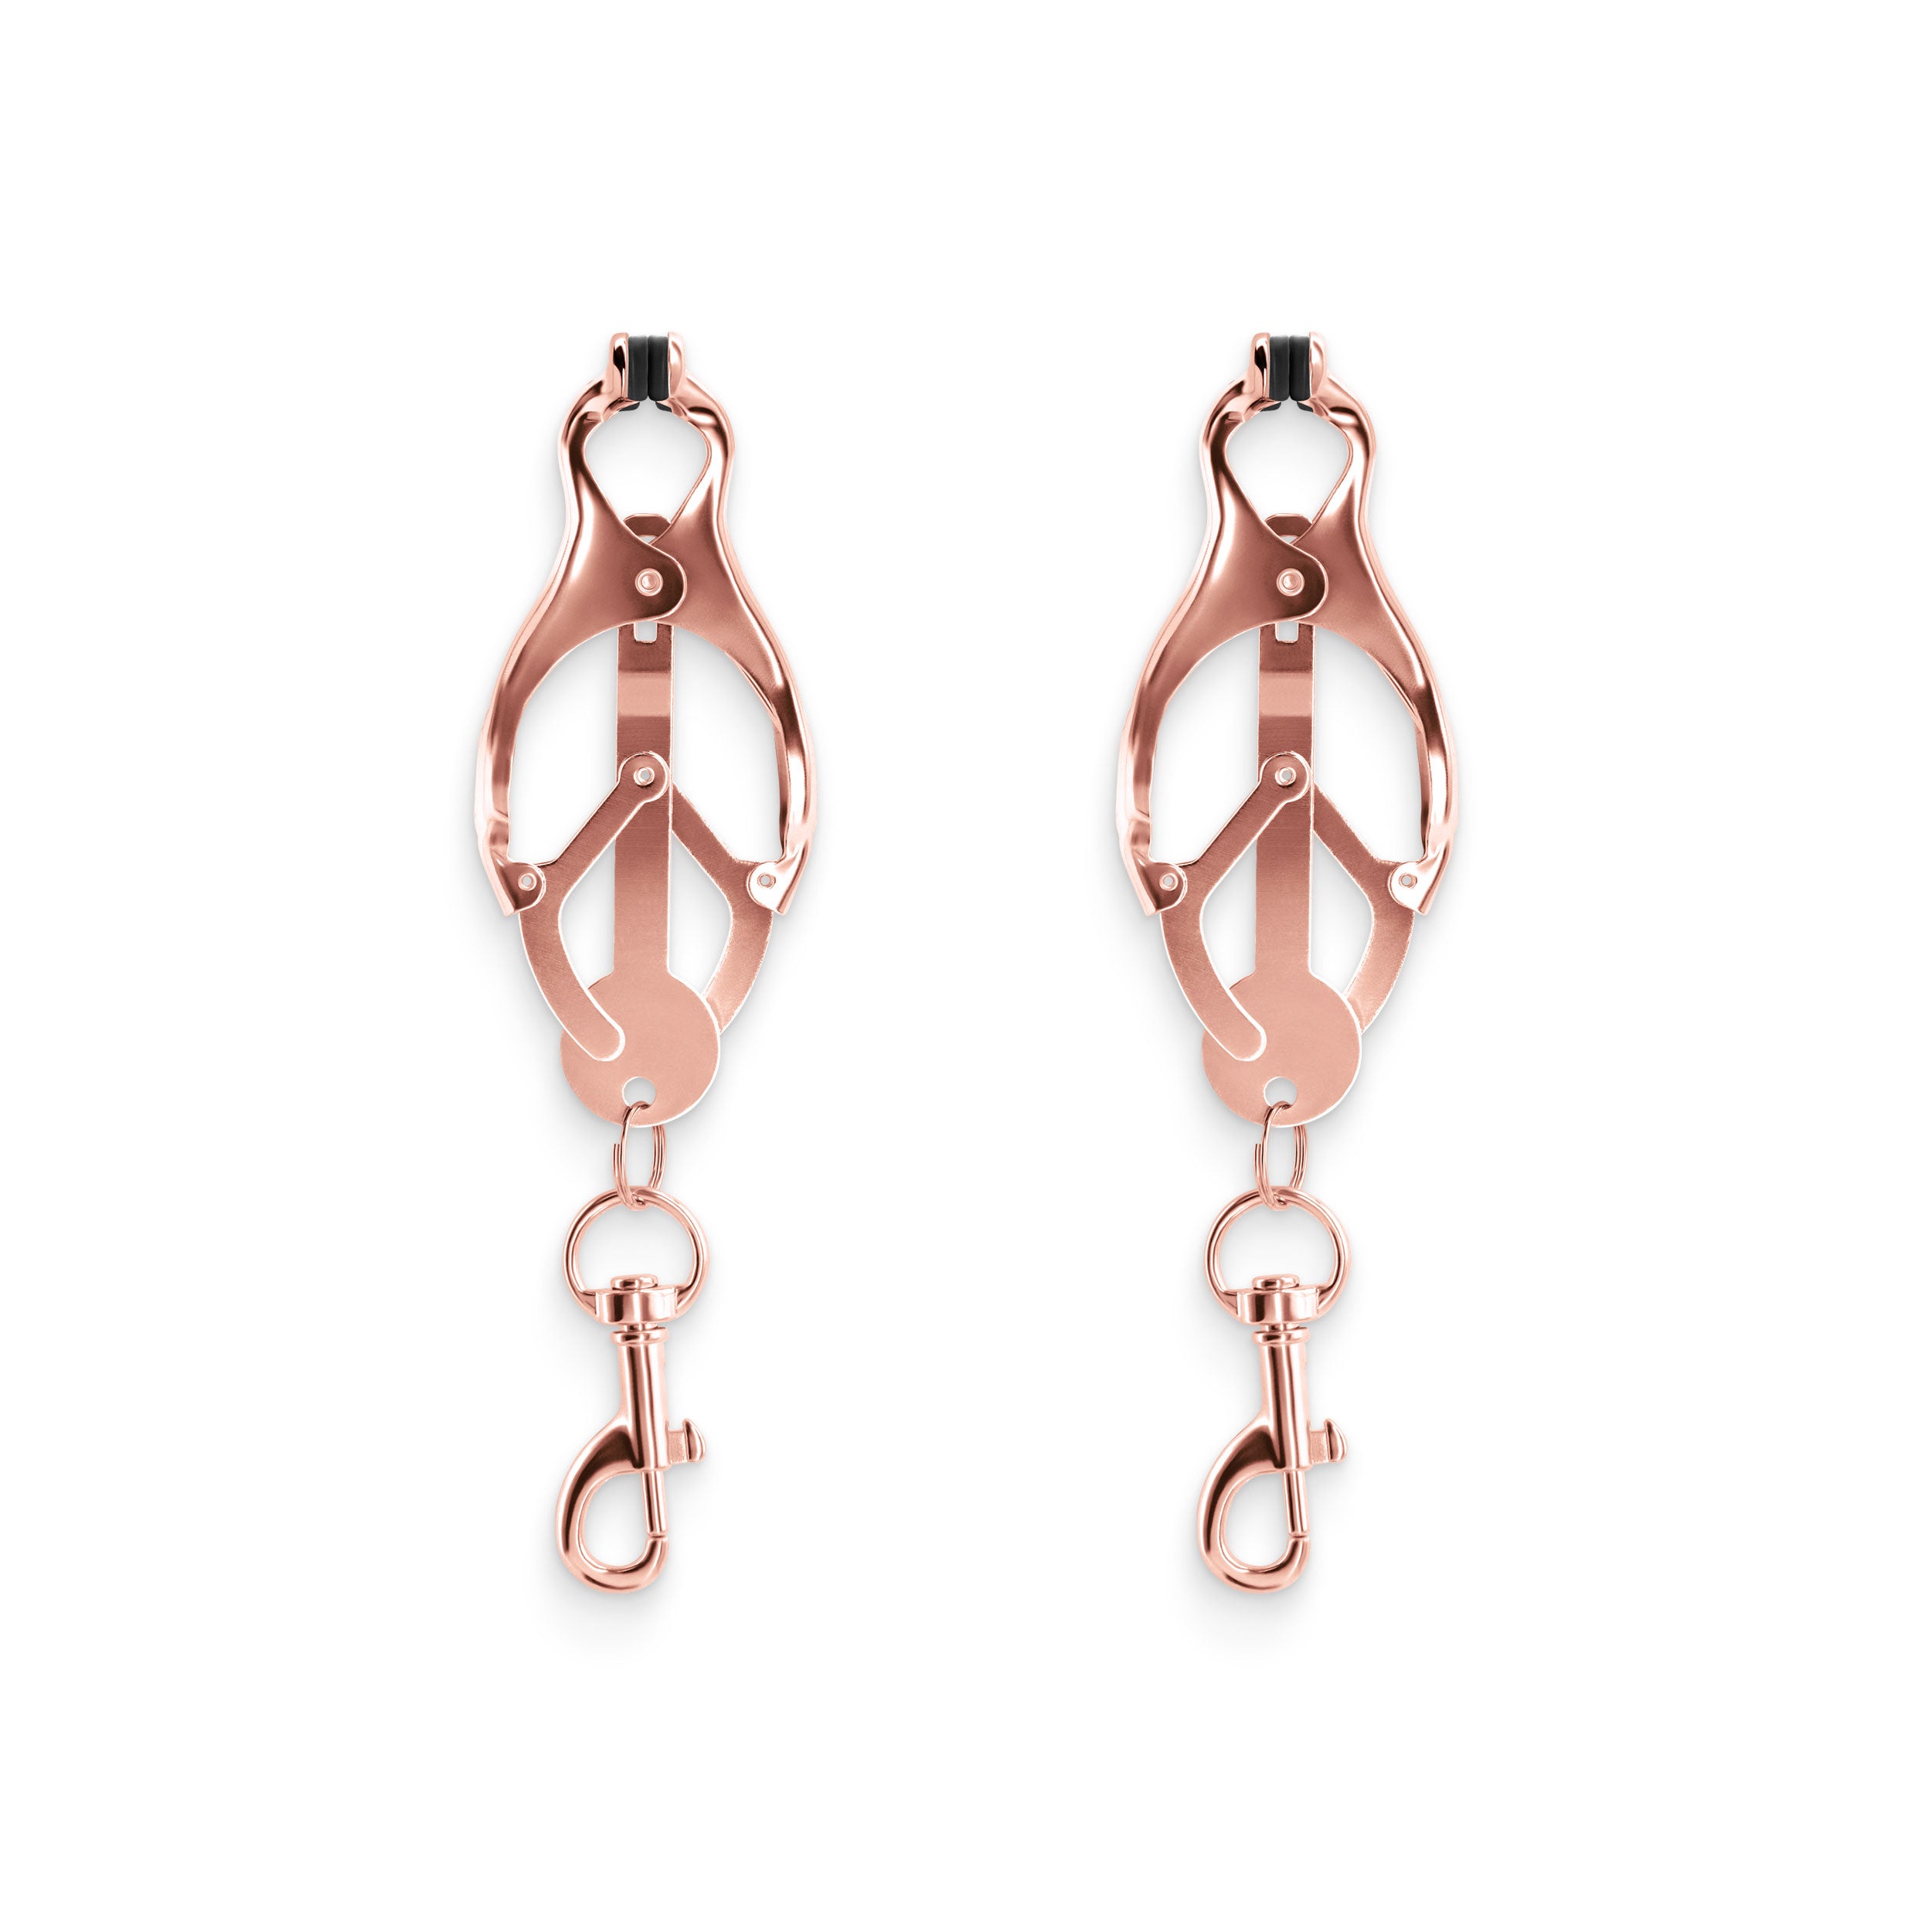 Bound - Nipple Clamps - C3 - Rose Gold-2